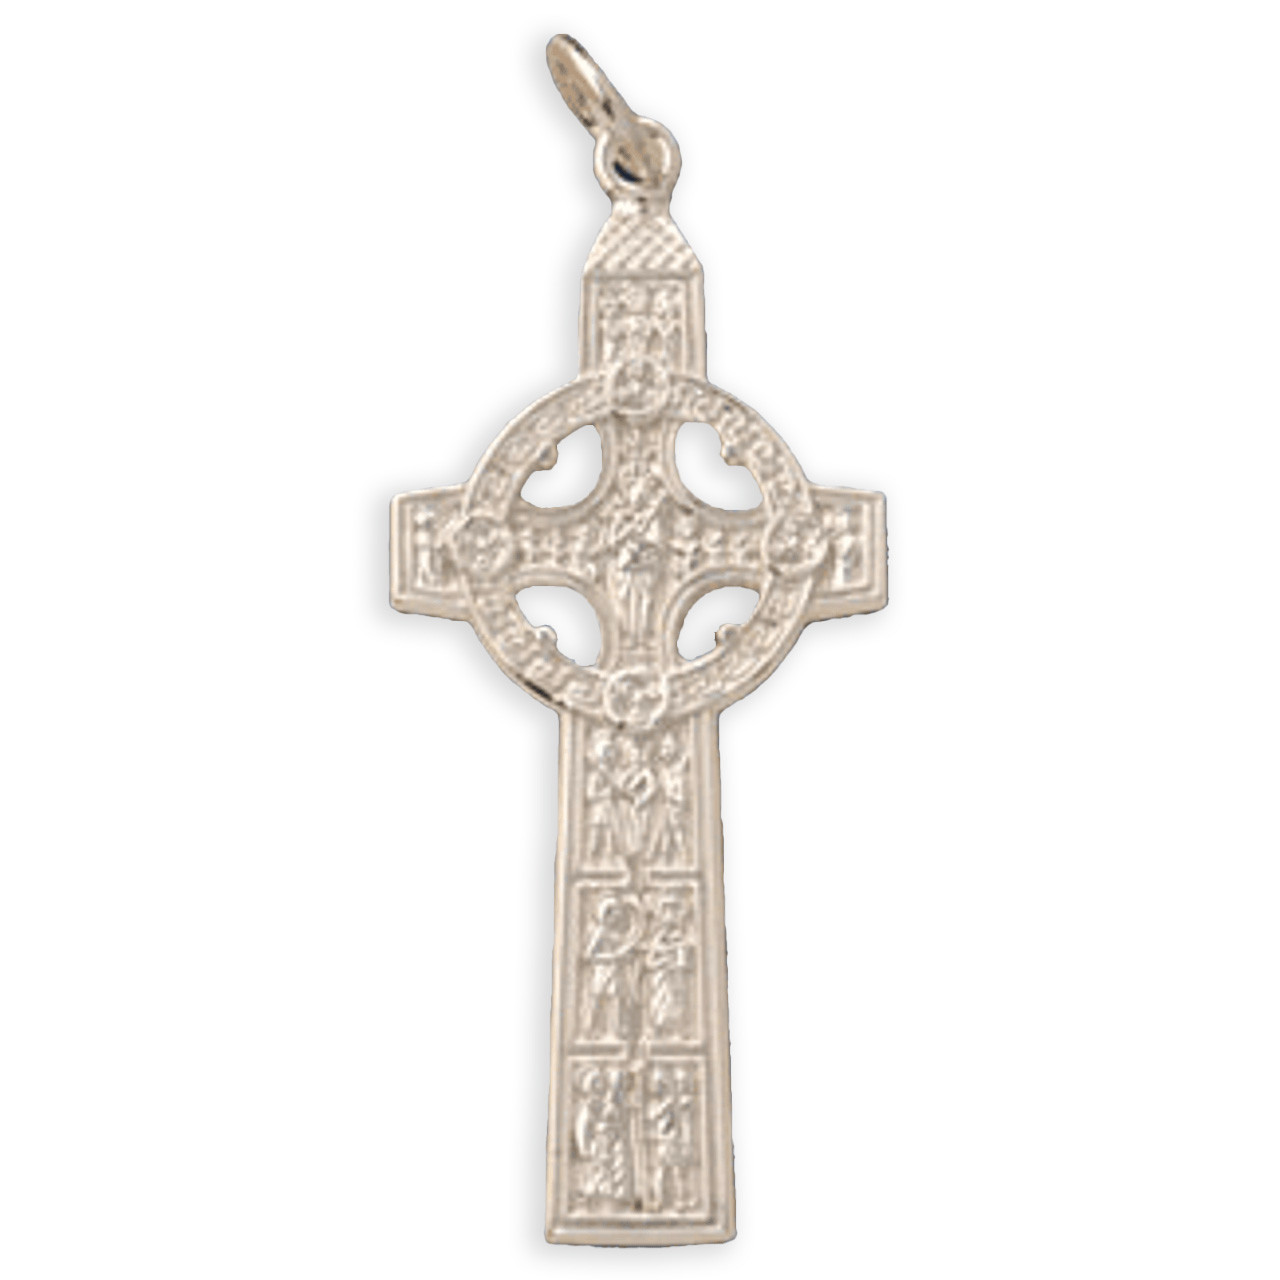 Genuine Sterling Silver Round Celtic Cross Beads by Gem and Silver